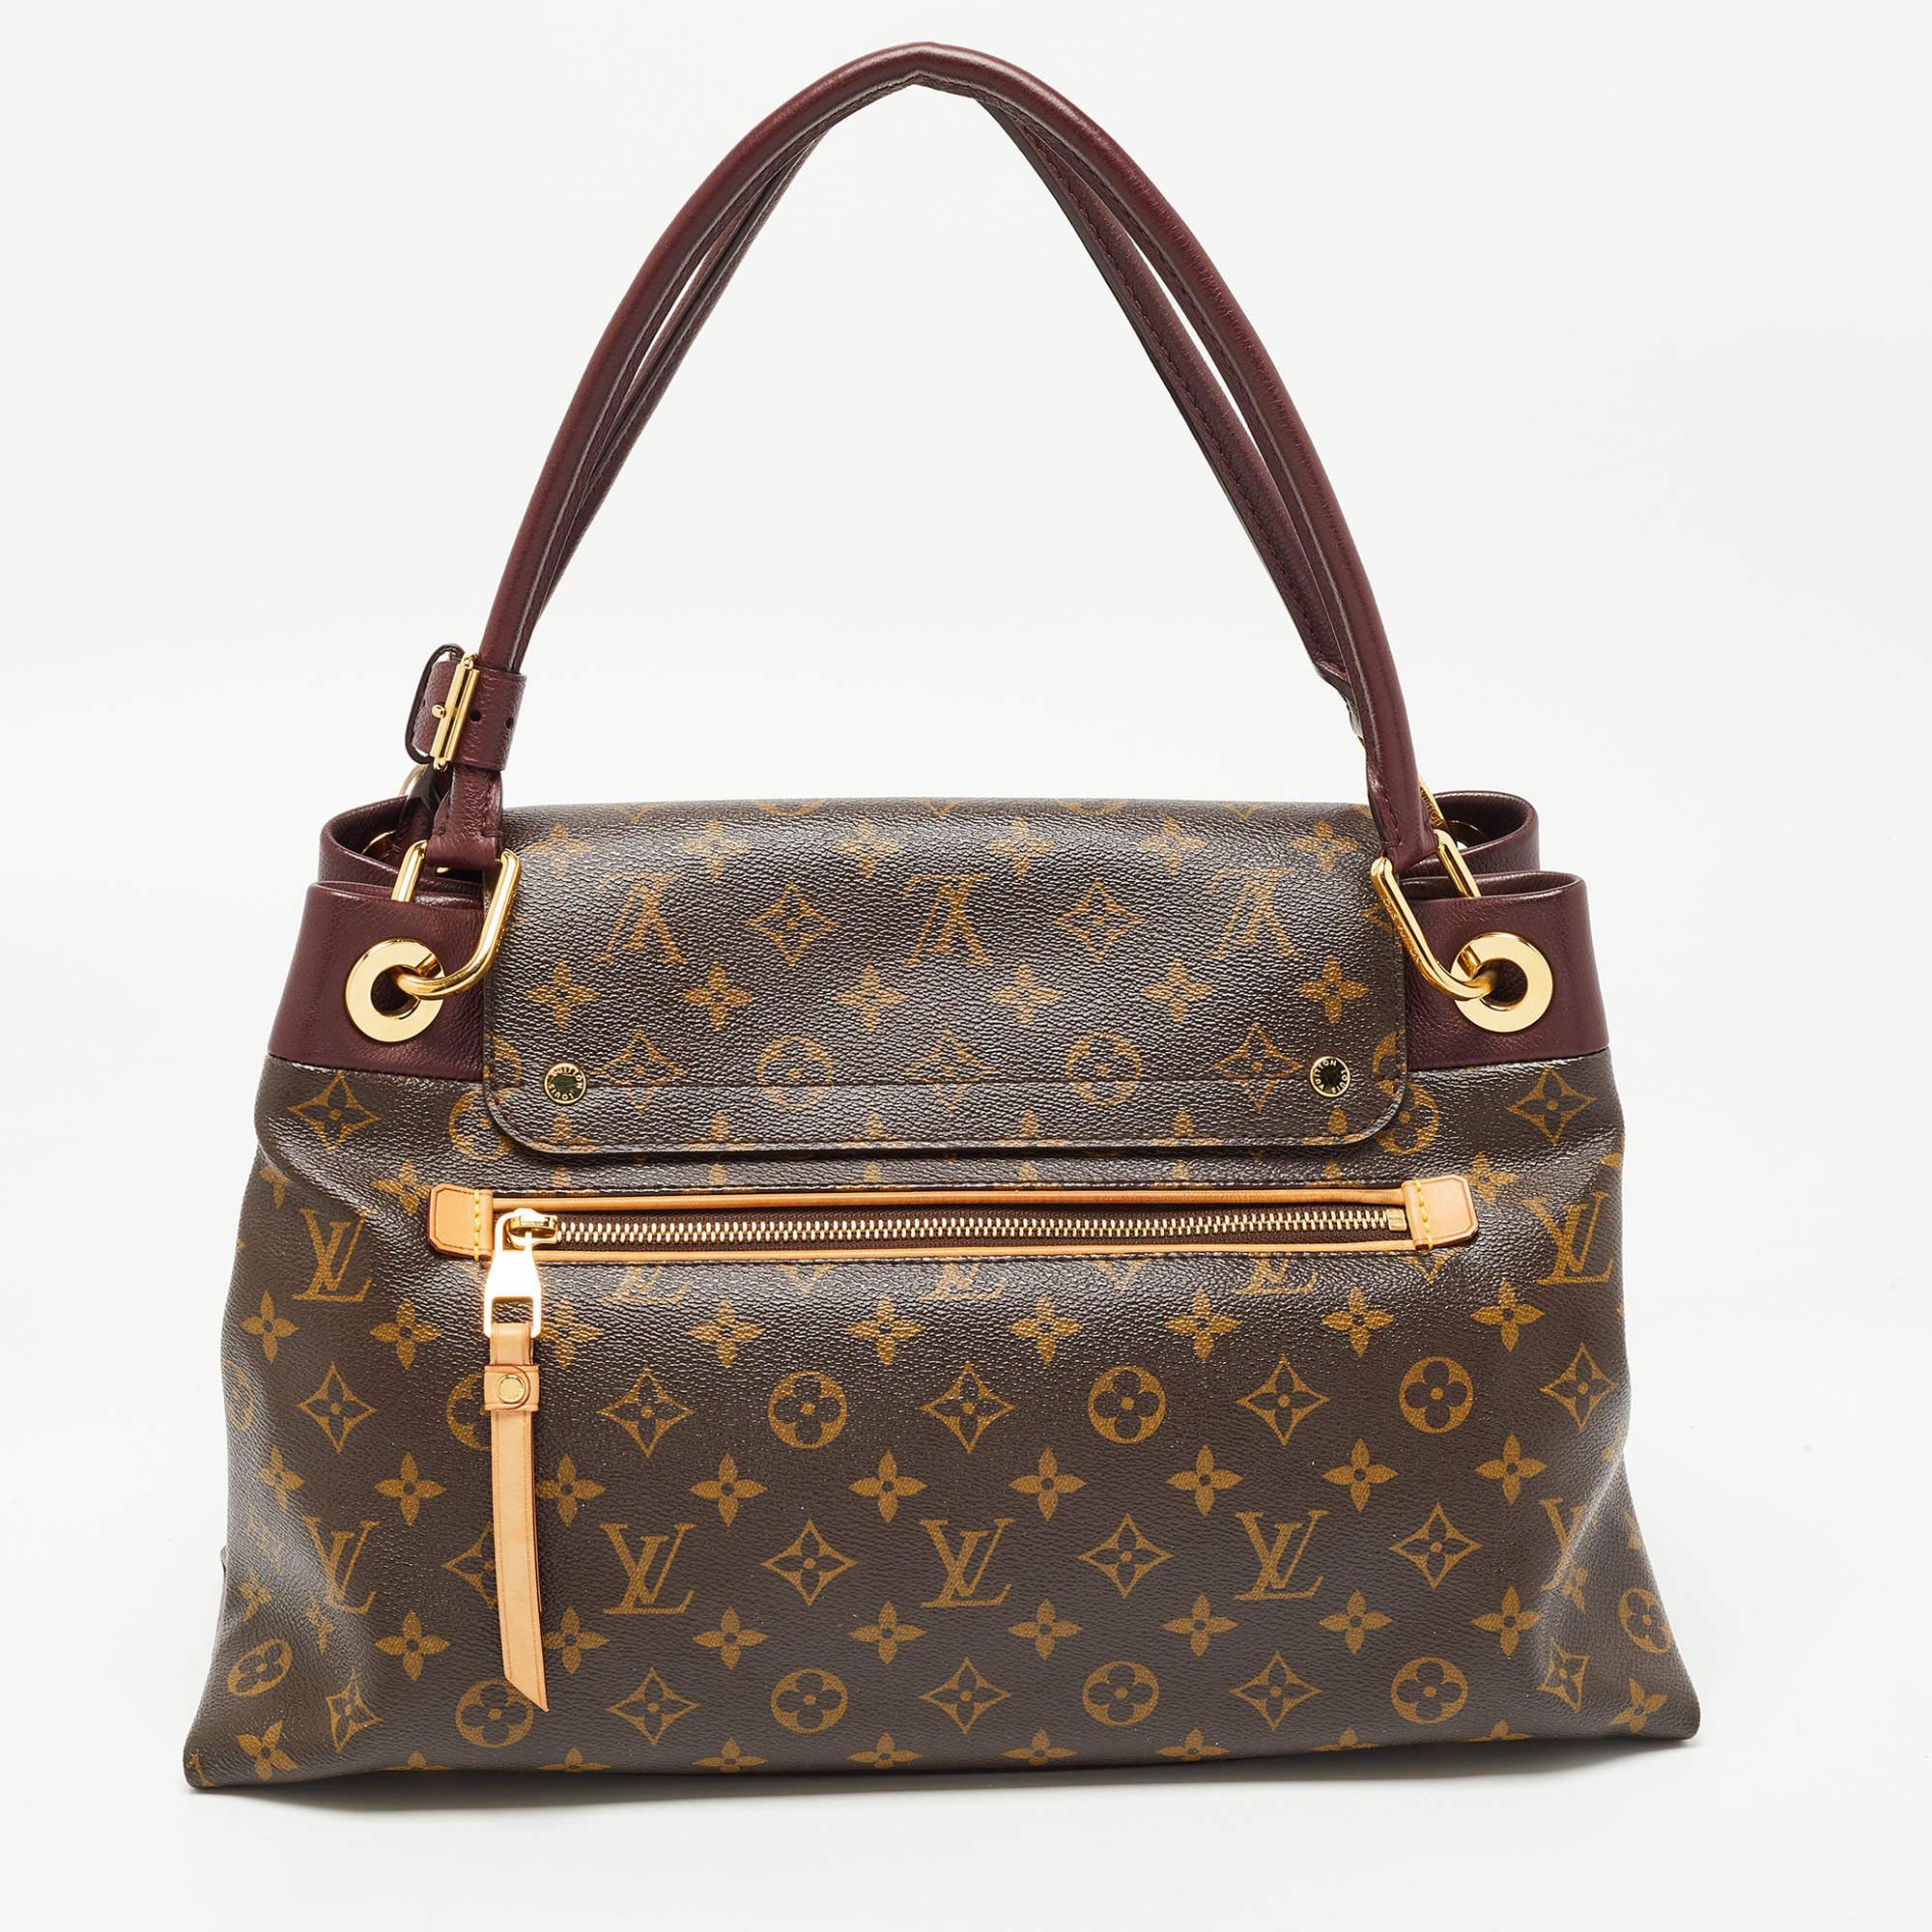 This Louis Vuitton handbag is a timeless piece that can last you season after season. This bag is made of monogram canvas and ideal to work all your needs. The interior is lined with Alcantara, making the bag highly durable and functional. Attain a